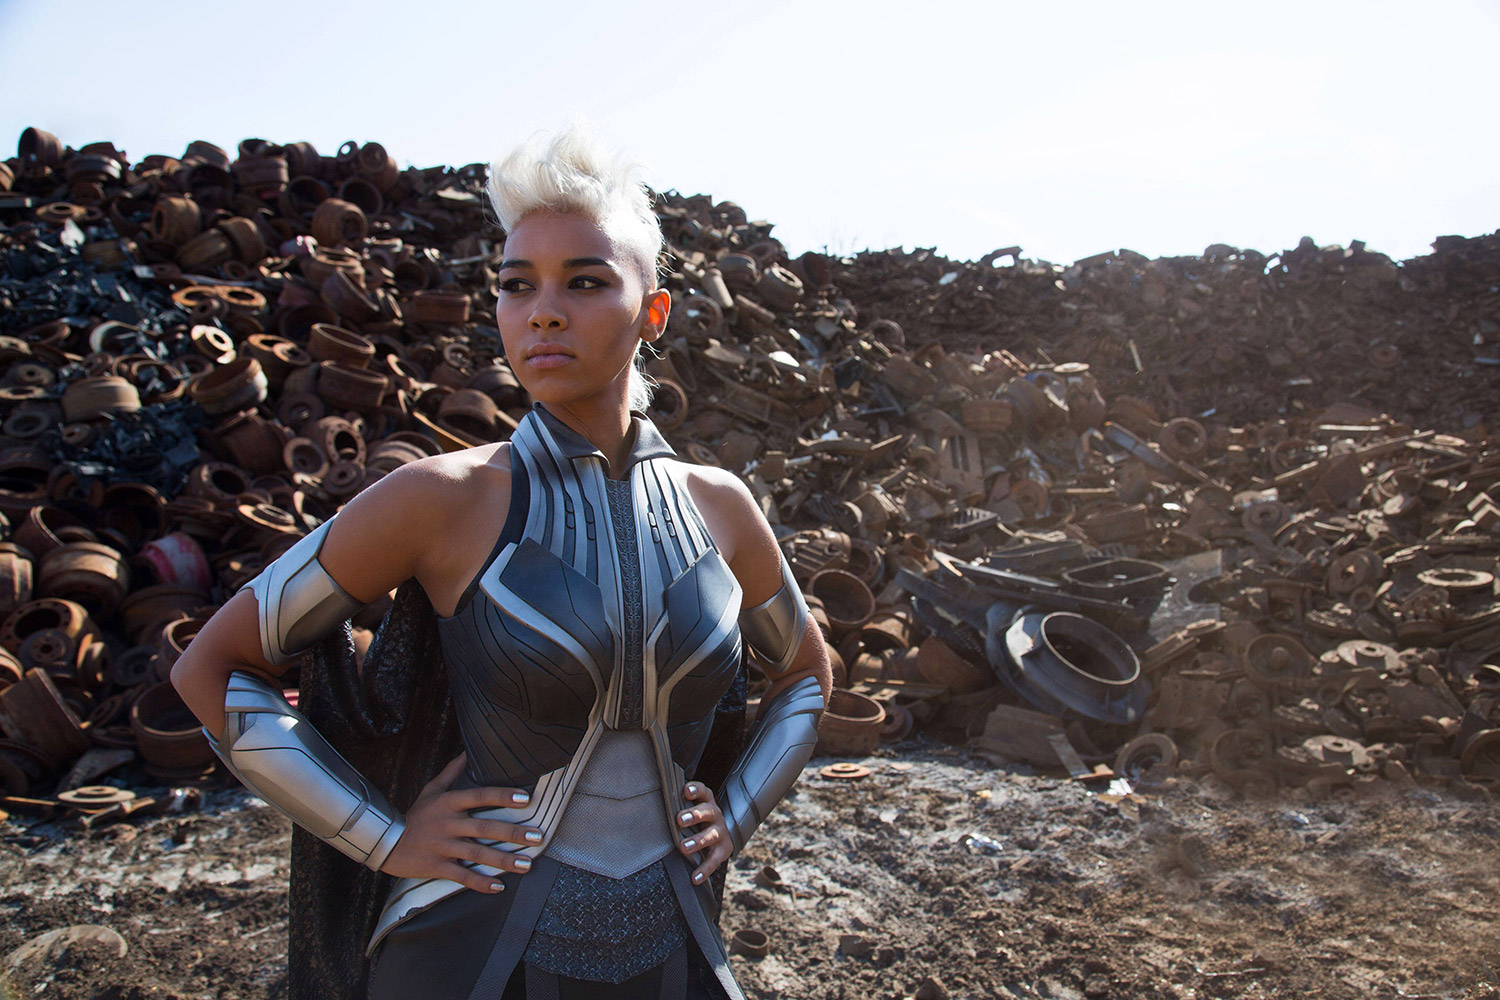 This character power piece spotlights one of the most powerful X-Men: Storm! 